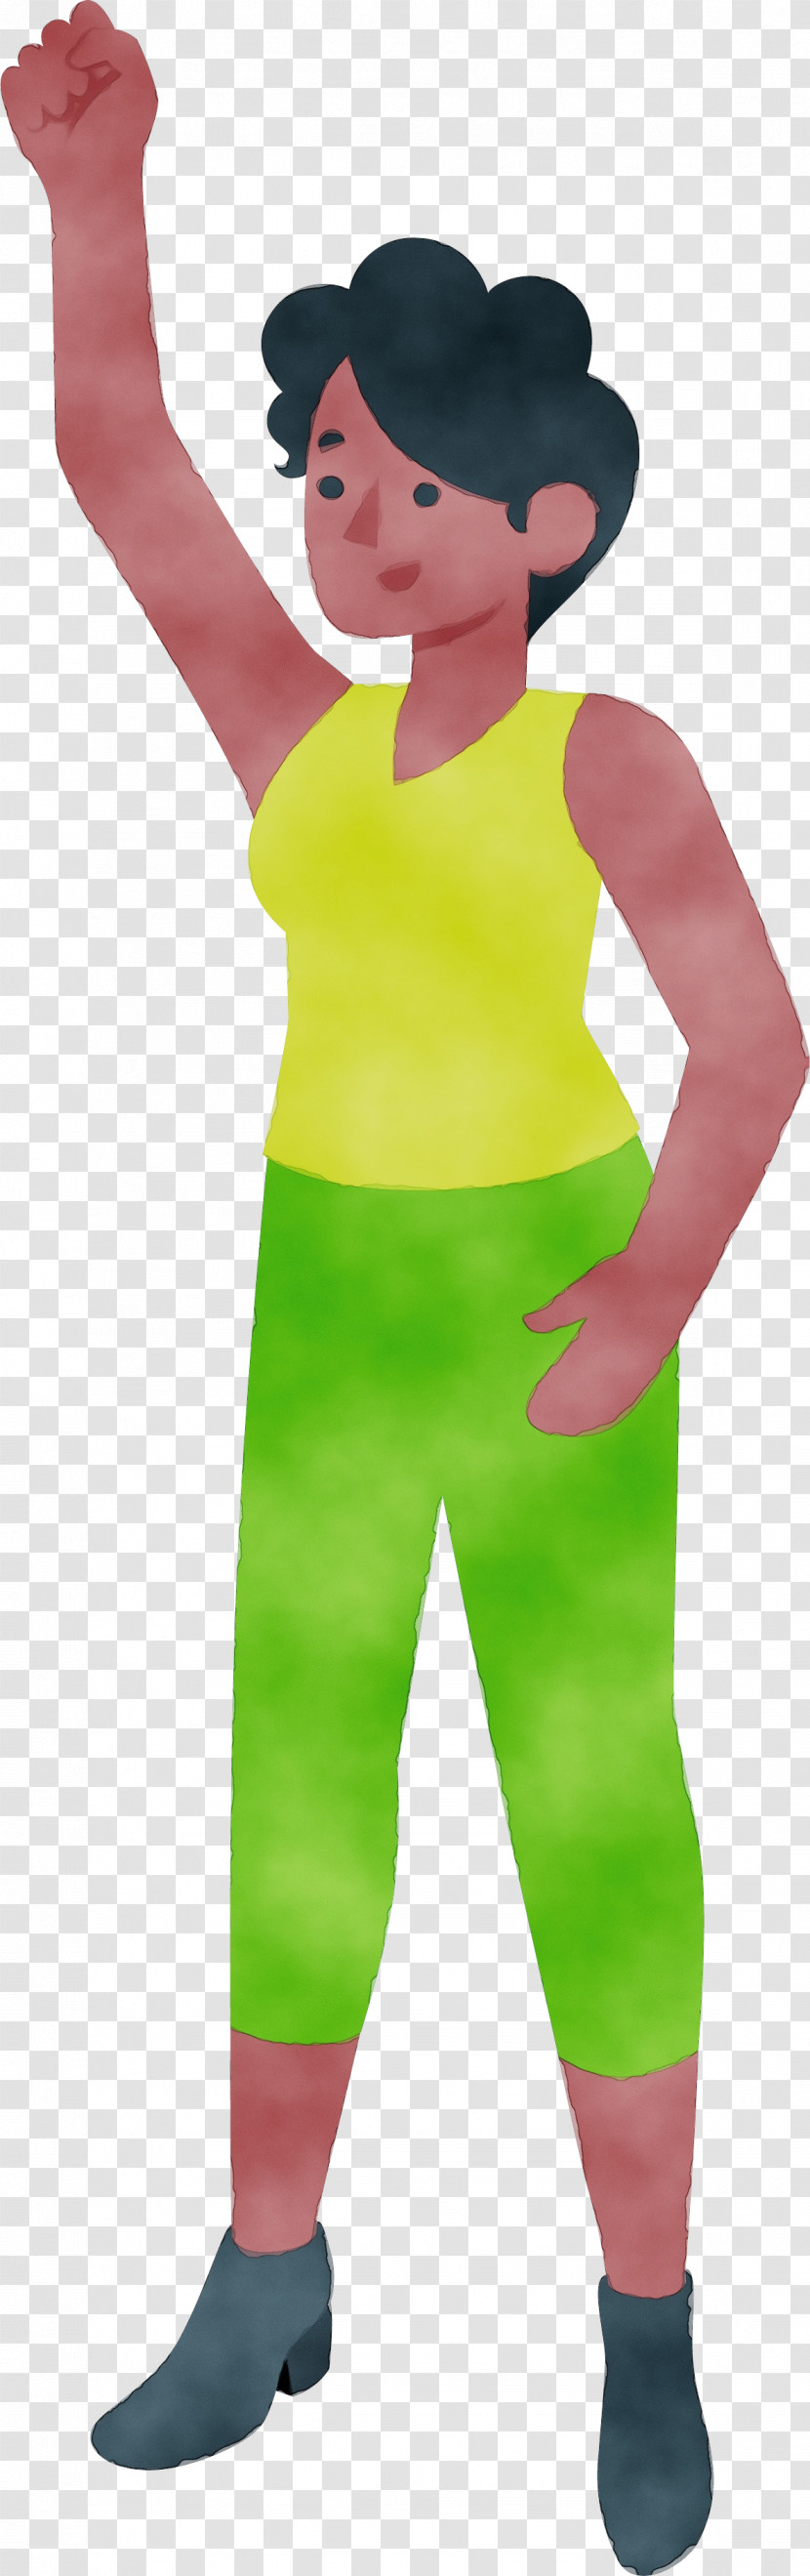 Costume Green Character Spandex Shoe Transparent PNG